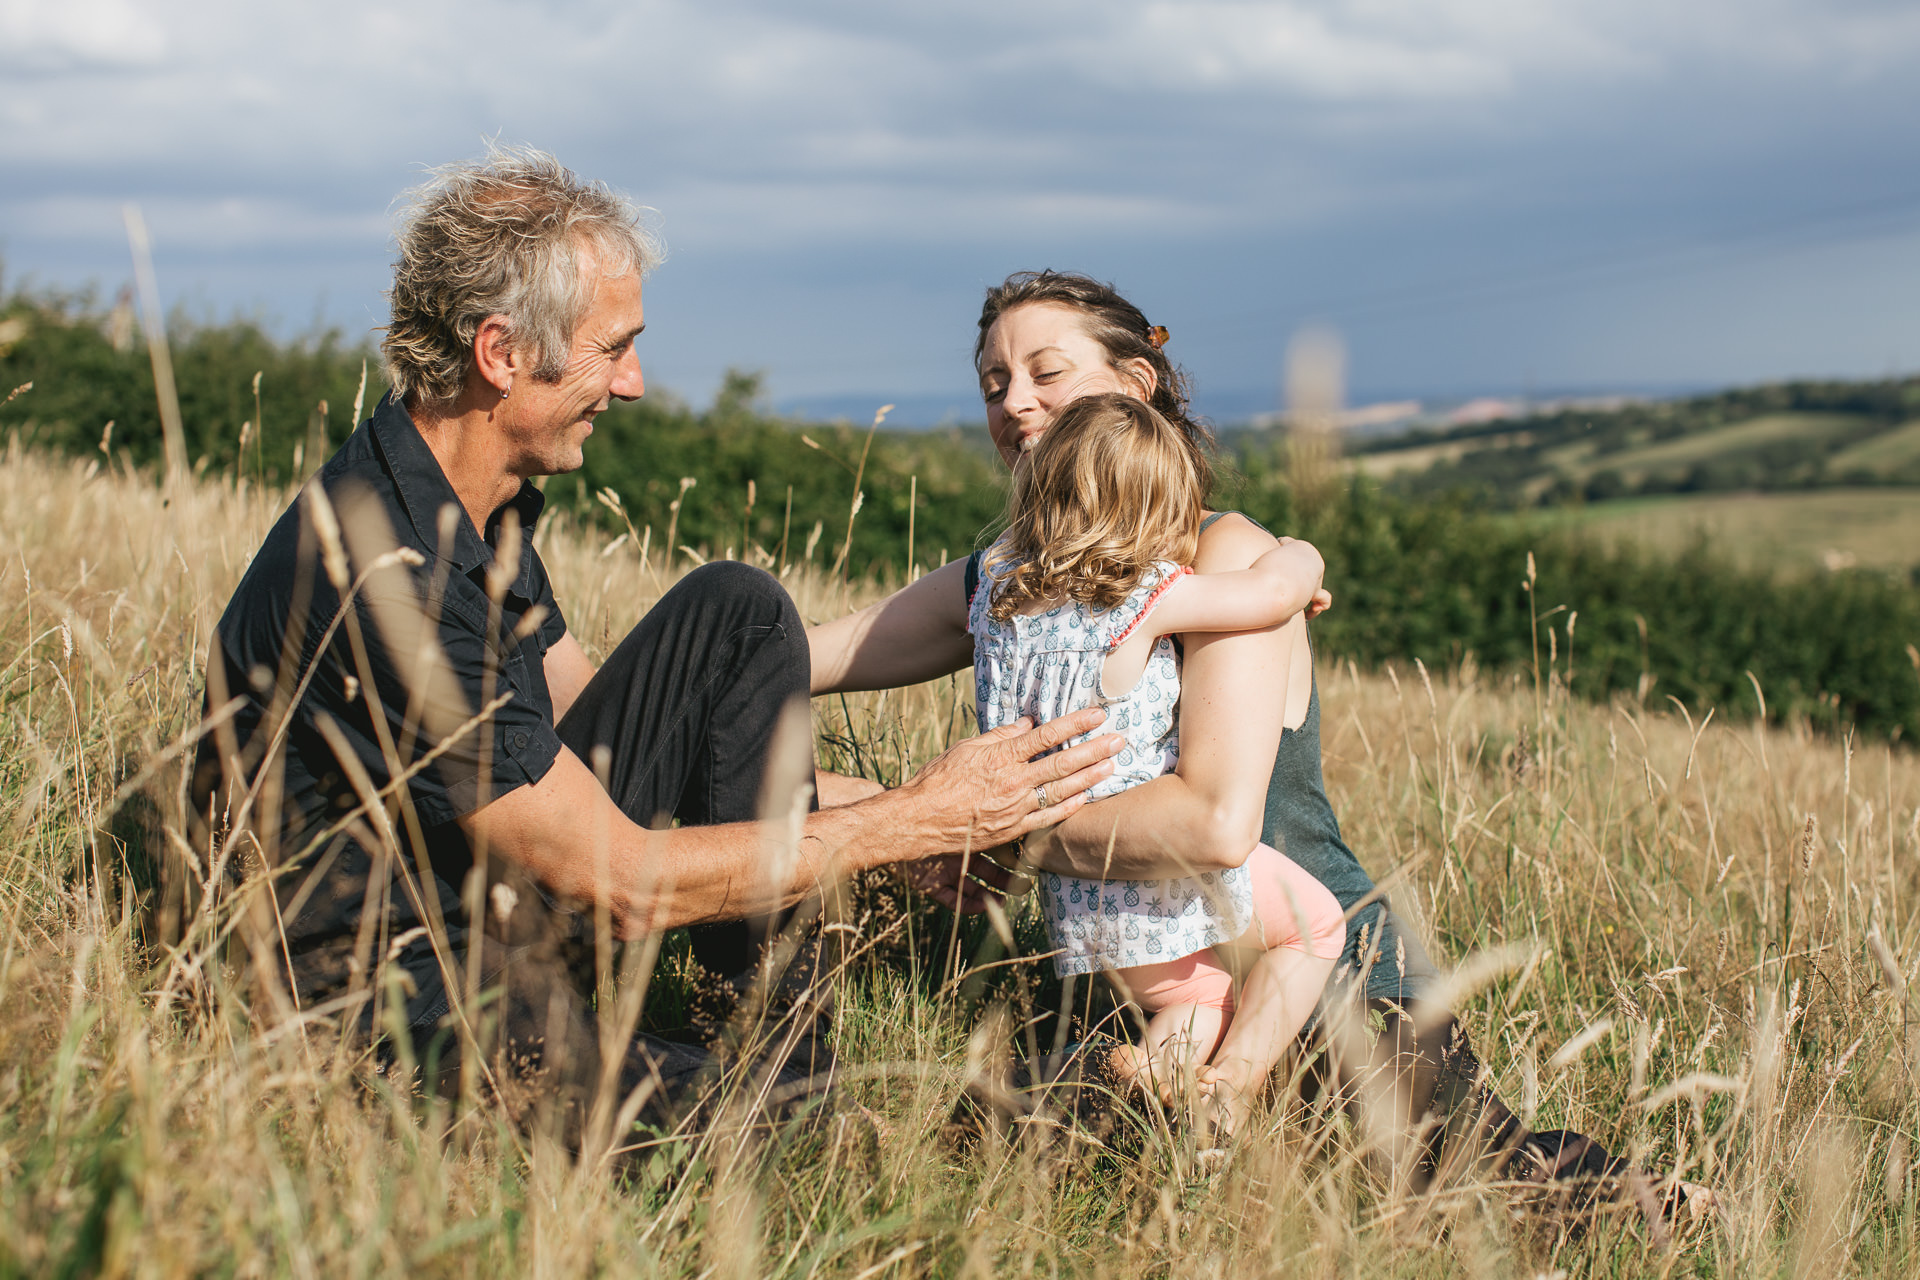 Two parents with a young daughter playing in long grass